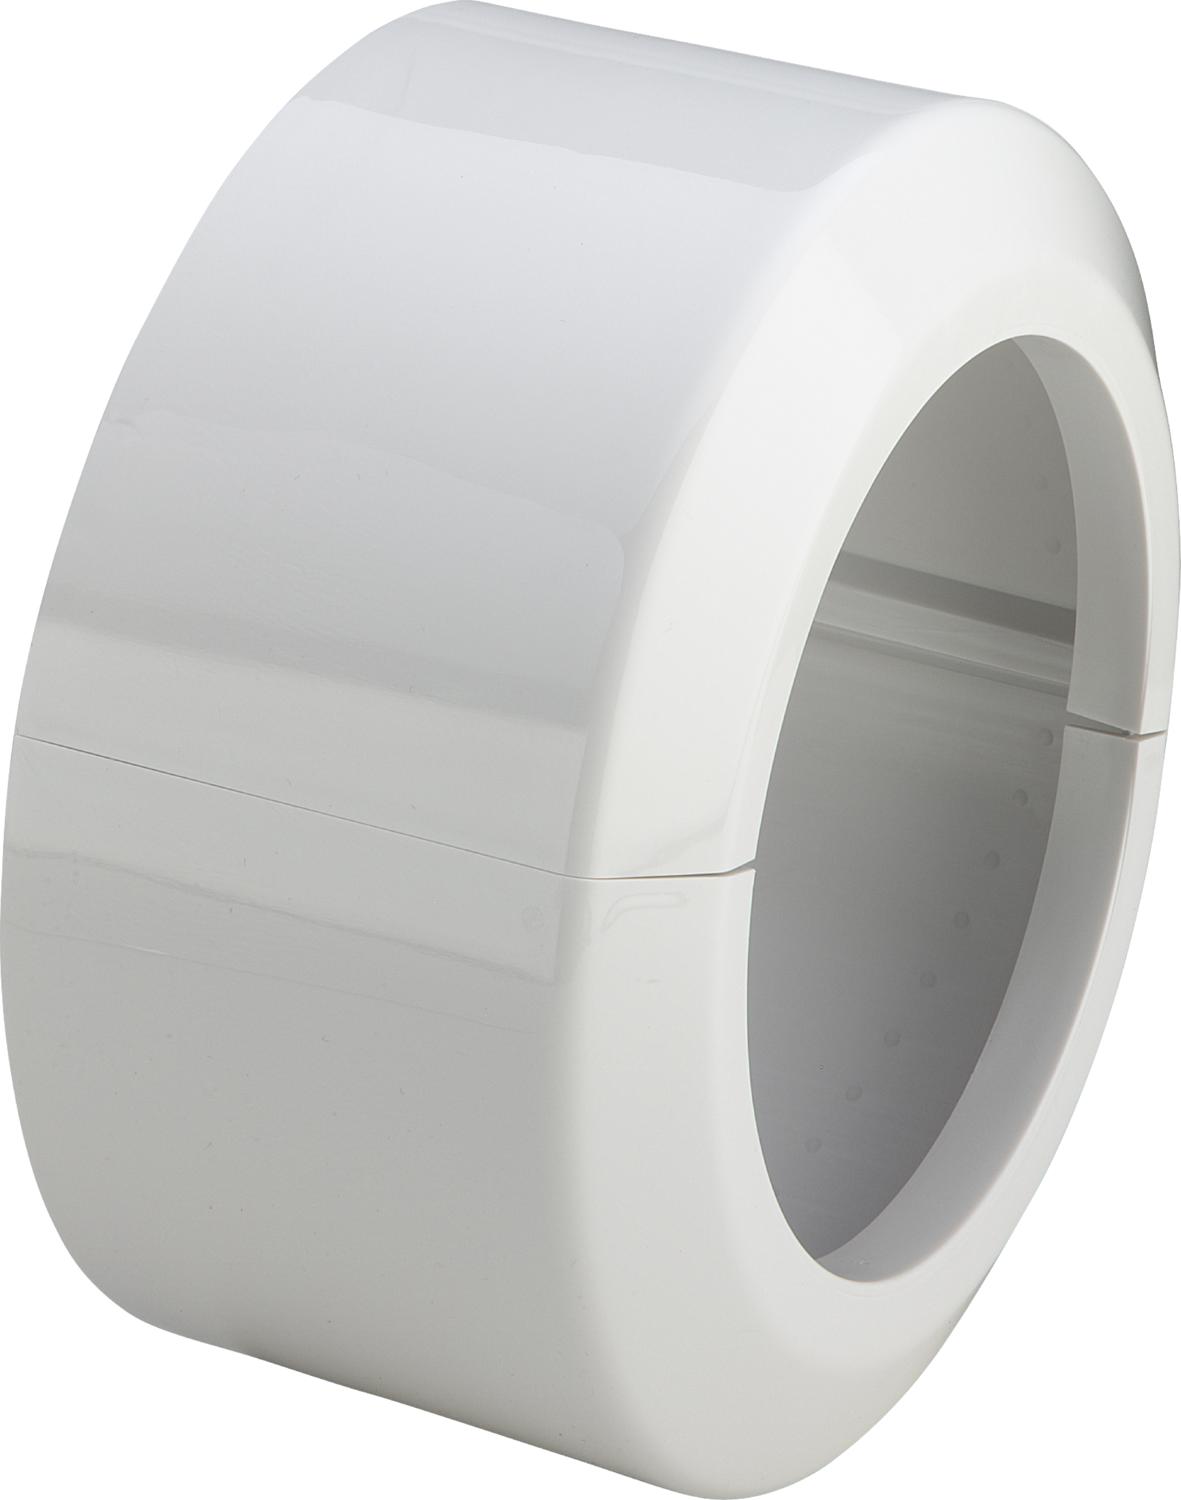 Picture of VIEGA rosette for WC connection elbow and socket 110x165x90, 101343 / 3821 white